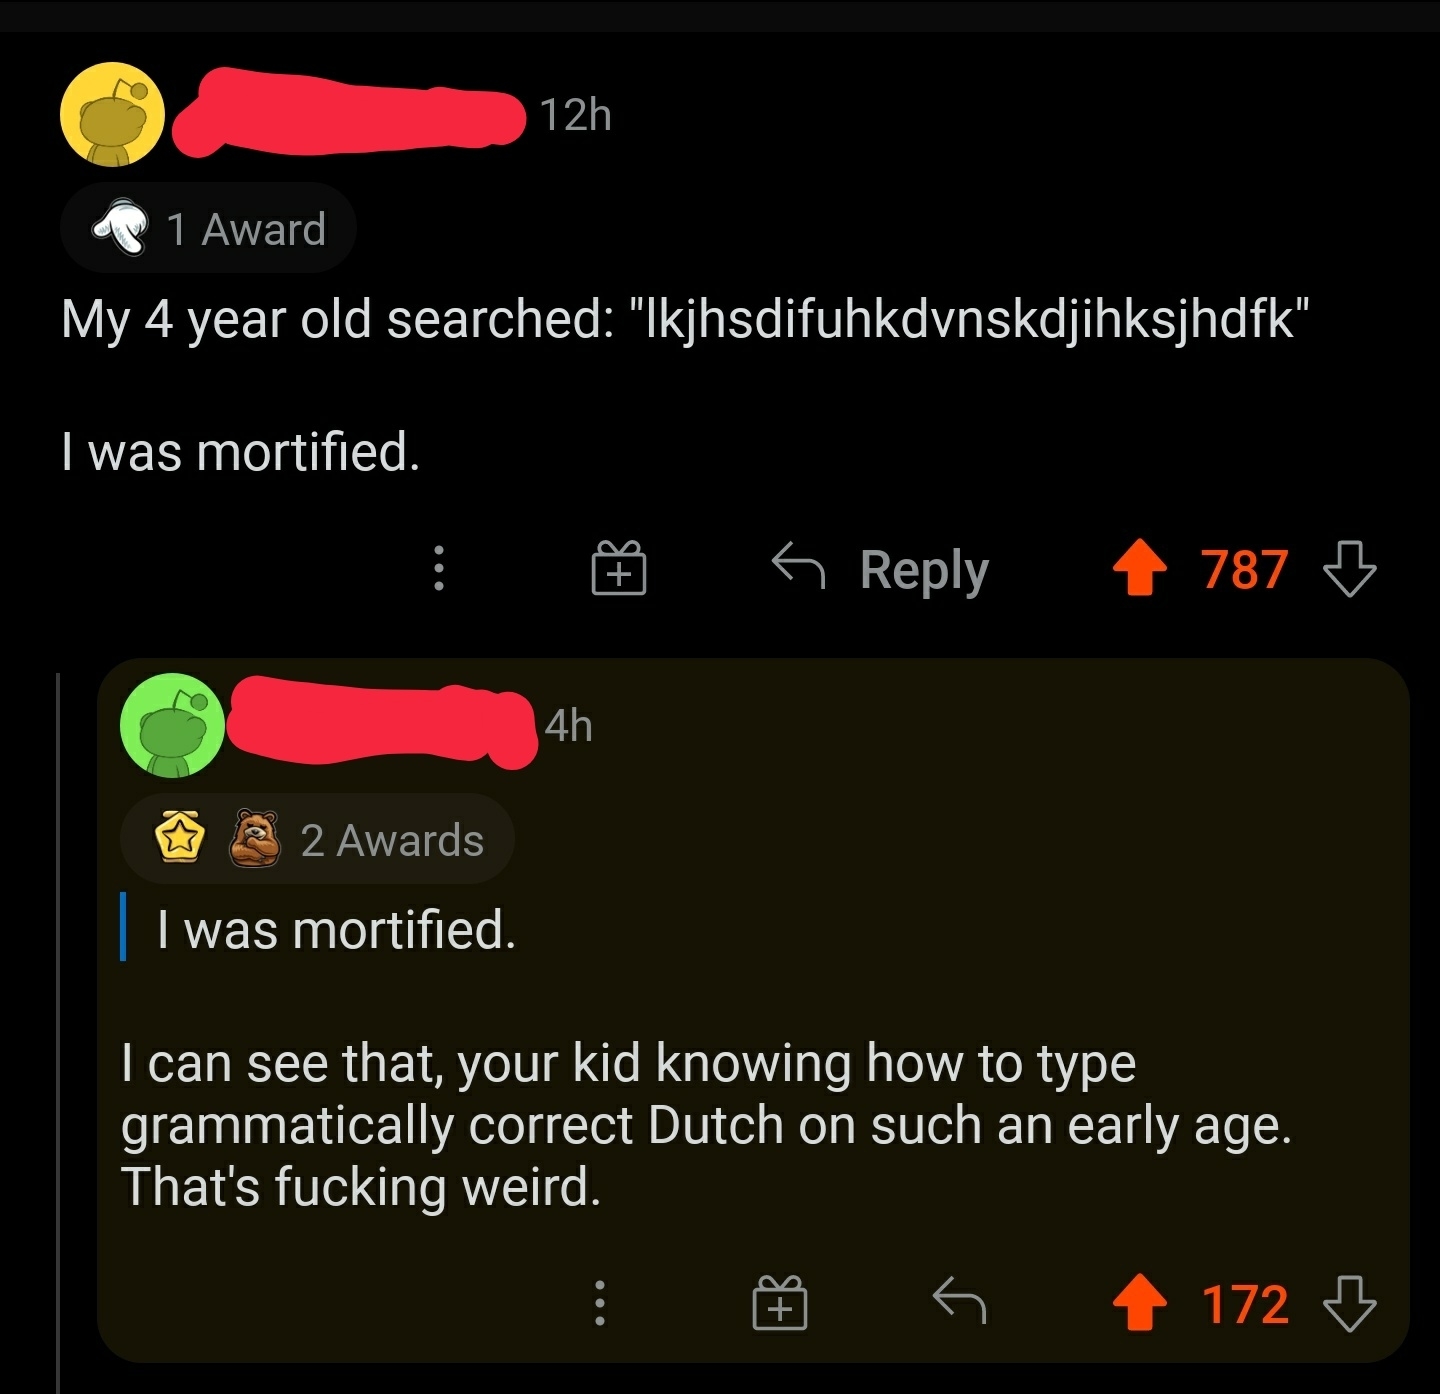 &quot;My 4 year old searched: &#x27;[random letters]&#x27; I was mortified&quot;; response: &quot;I can see that, your kid knowing how to type grammatically correct Dutch at such an early age; that&#x27;s fucking weird&quot;